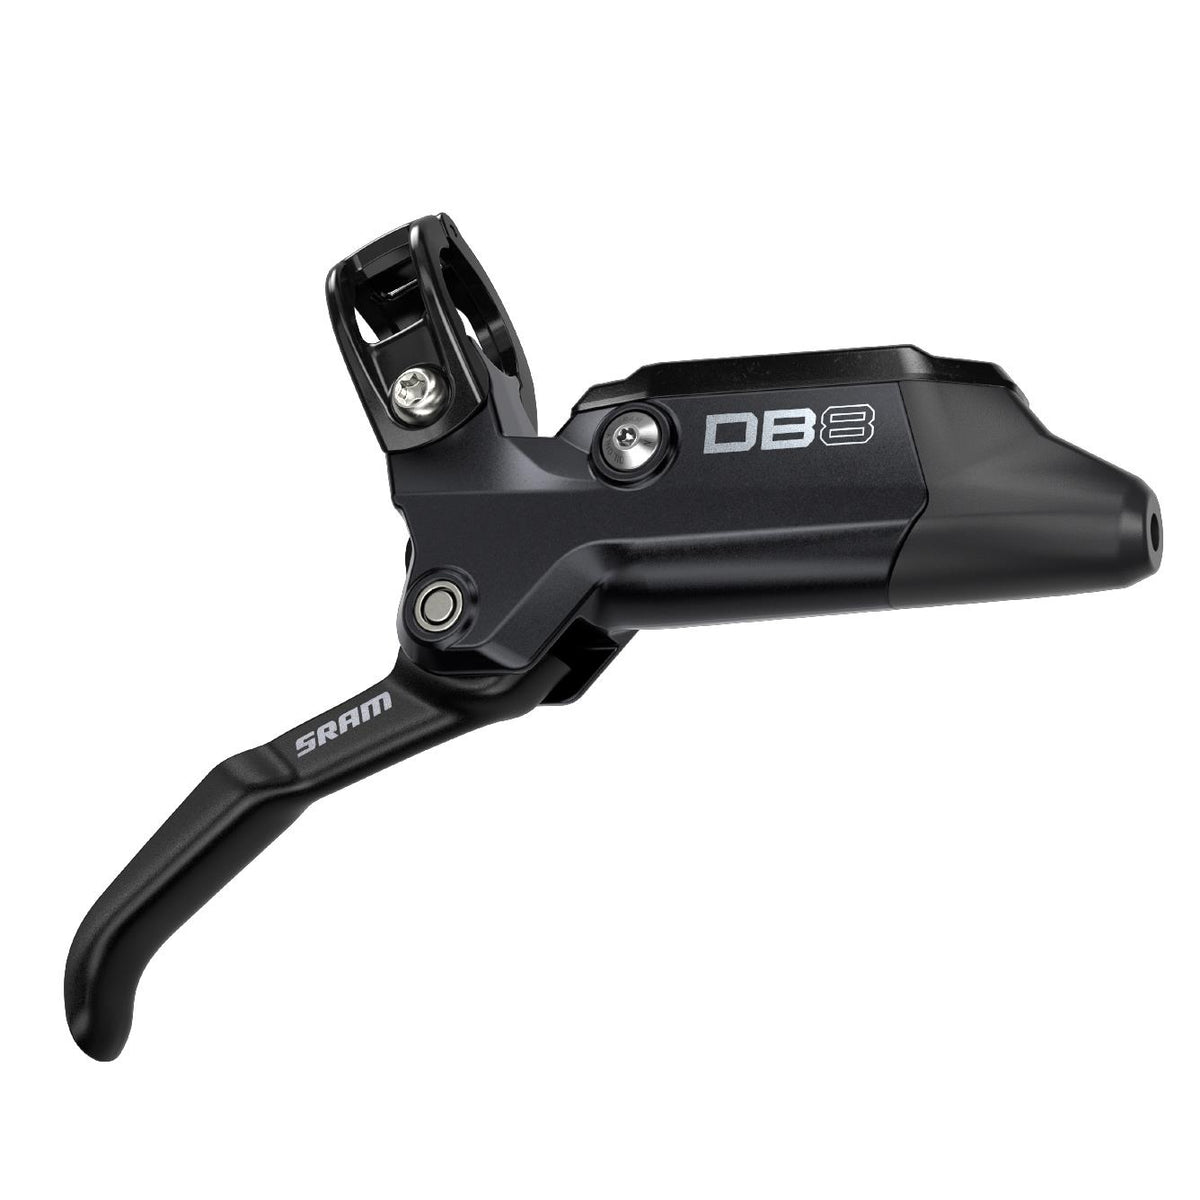 Sram Disc Brake Db8 - (Includes Mmx Clamp, Rotor/Bracket Sold Separately) - Mineral Oil Brake A2